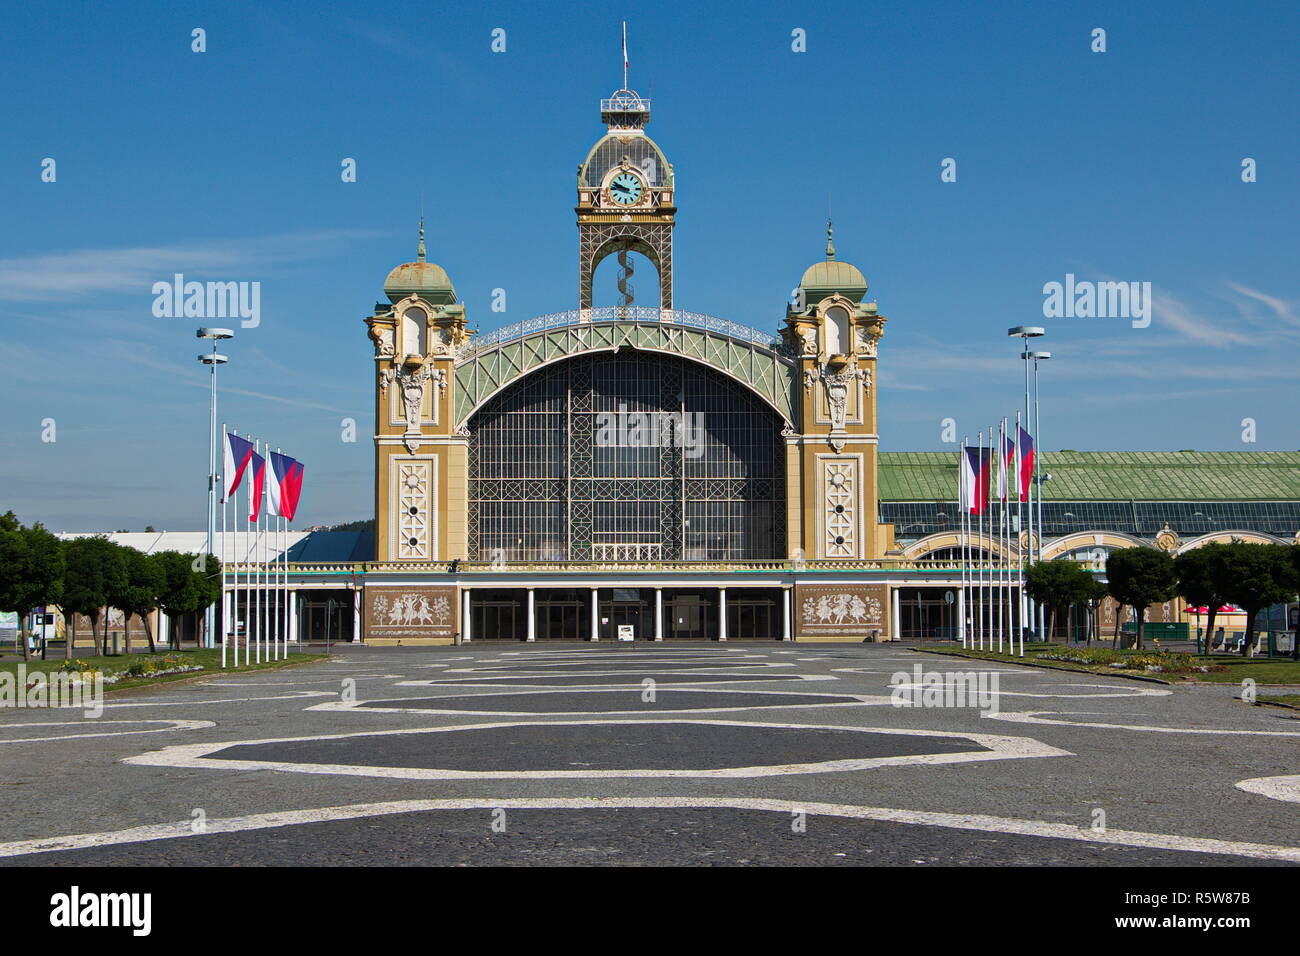 industrial palace on prague exhibition grounds Stock Photo